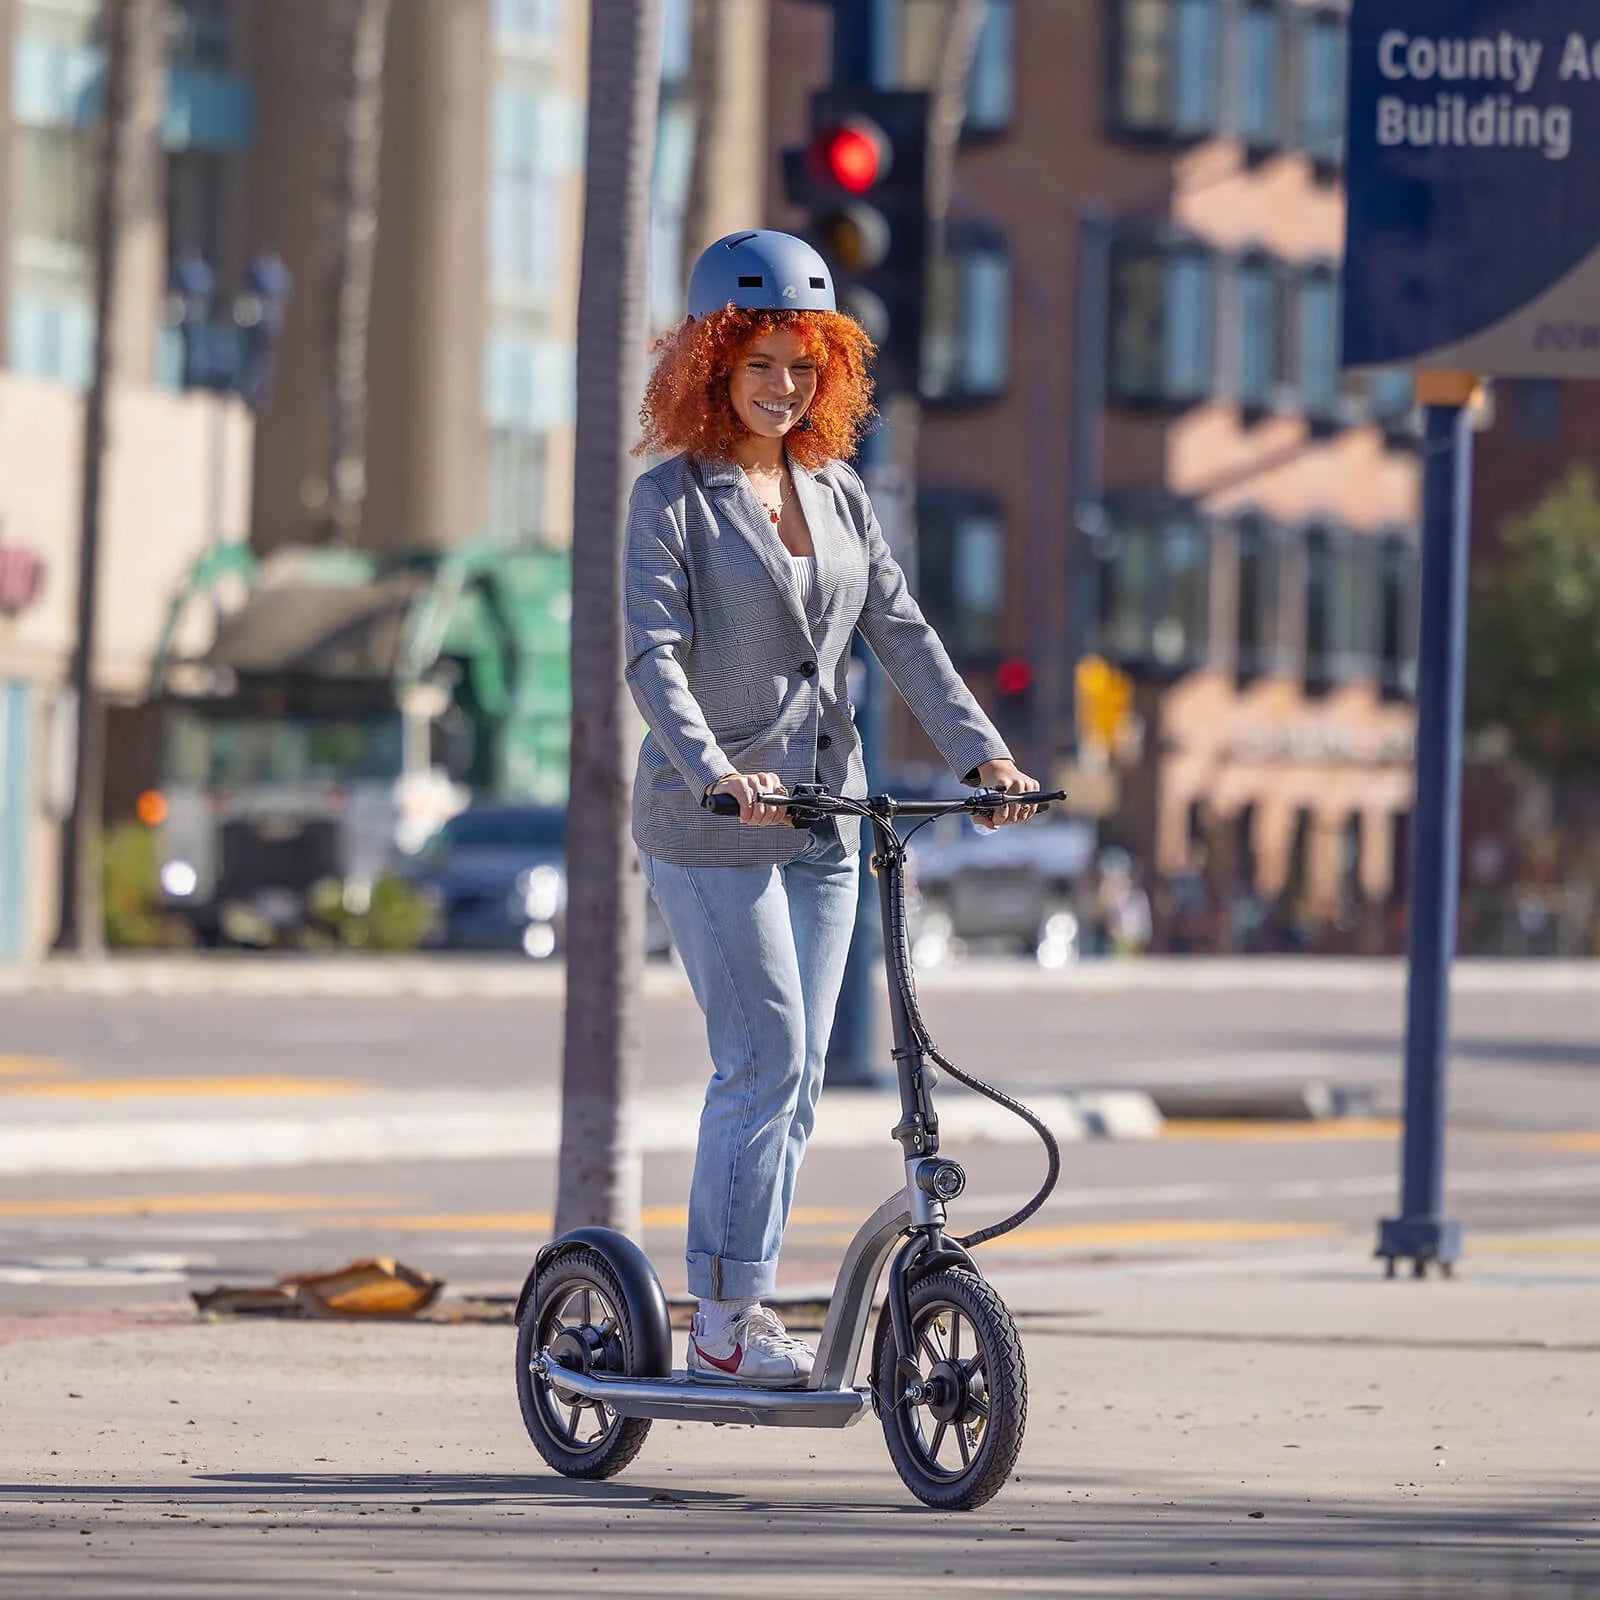 Hiboy MAX Pro 11 Electric Scooter